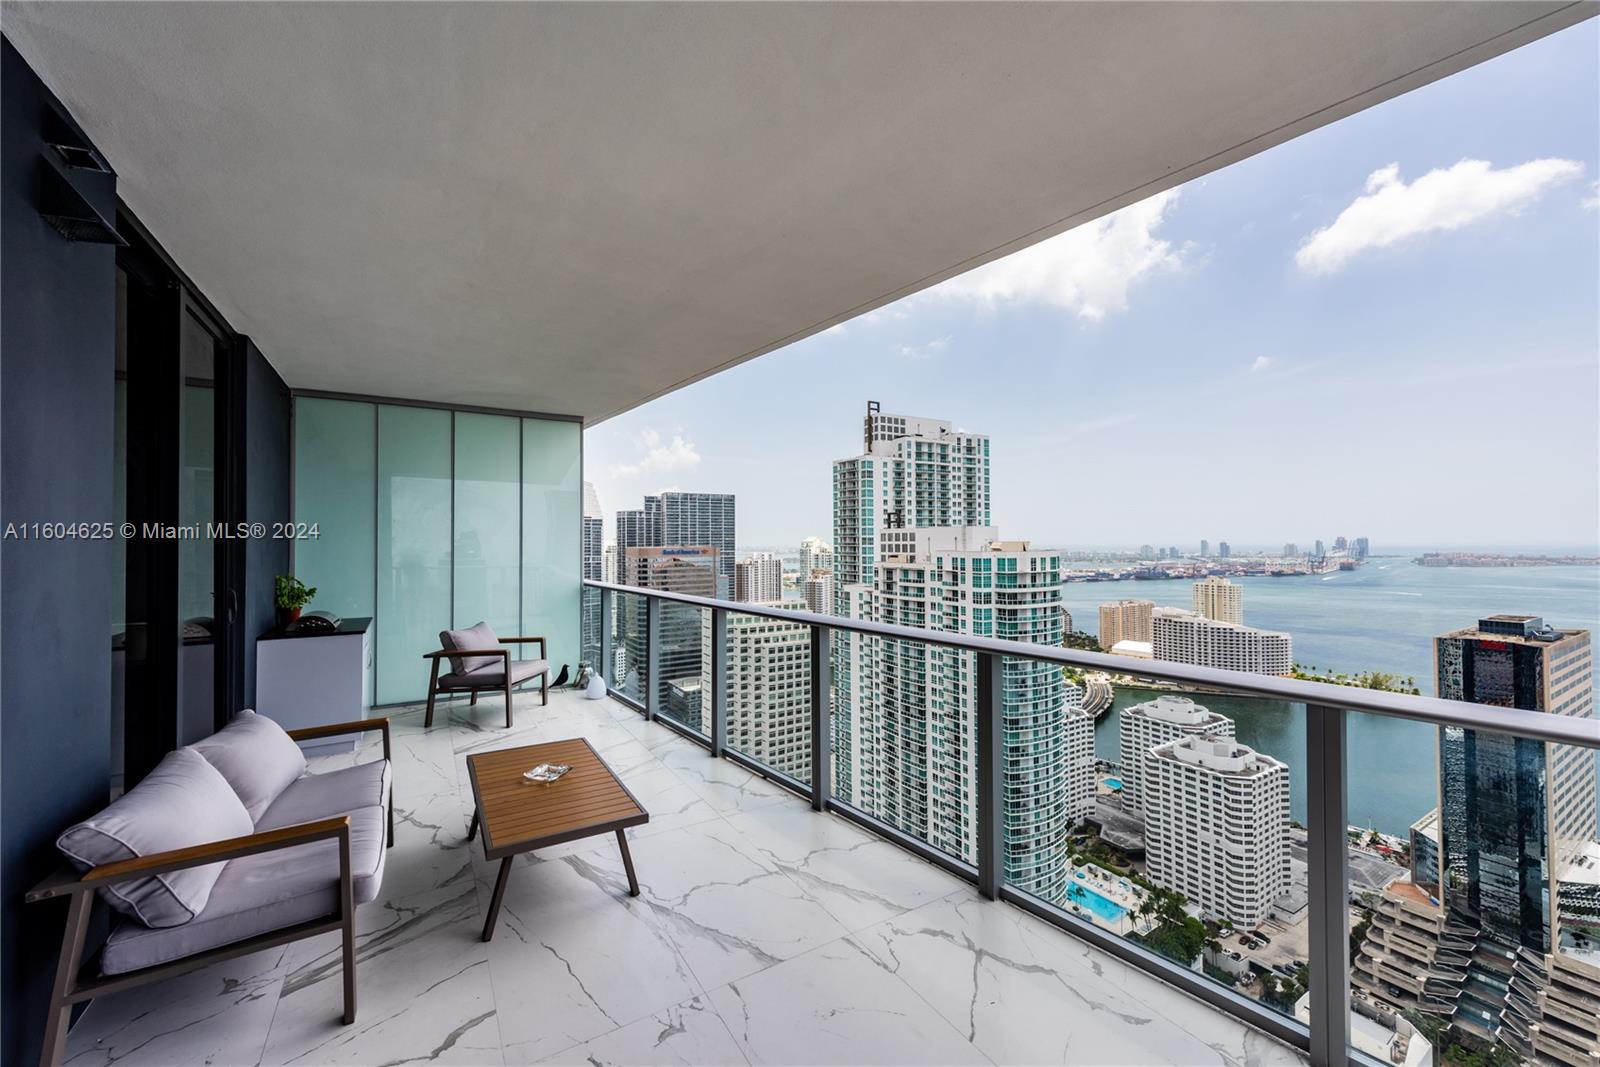 Spectacular brand new upgraded corner unit at the iconic 1010 Brickell Condo. Professionally furnished apartment, 4 beds (enclosed den), 3 baths, private elevator, 9-foot ceiling heights, balcony with bbq/summer kitchen & stunning views, top of the line Smeg appliances! Building offers: outdoor movie theatre, restaurant & swimming pool @ 50th floor roof top; Co-ed Hammam spa w cold & hot Jacuzzi, massage & treatments rooms, sauna & steam room; basketball & racquetball courts, running track, indoor heated swimming pool, fitness center, party room w kitchen, open terrace & barbeque, kids room w bowling, virtual golf, among others. Excellent location next to public transportation, Brickell City Centre, & more.